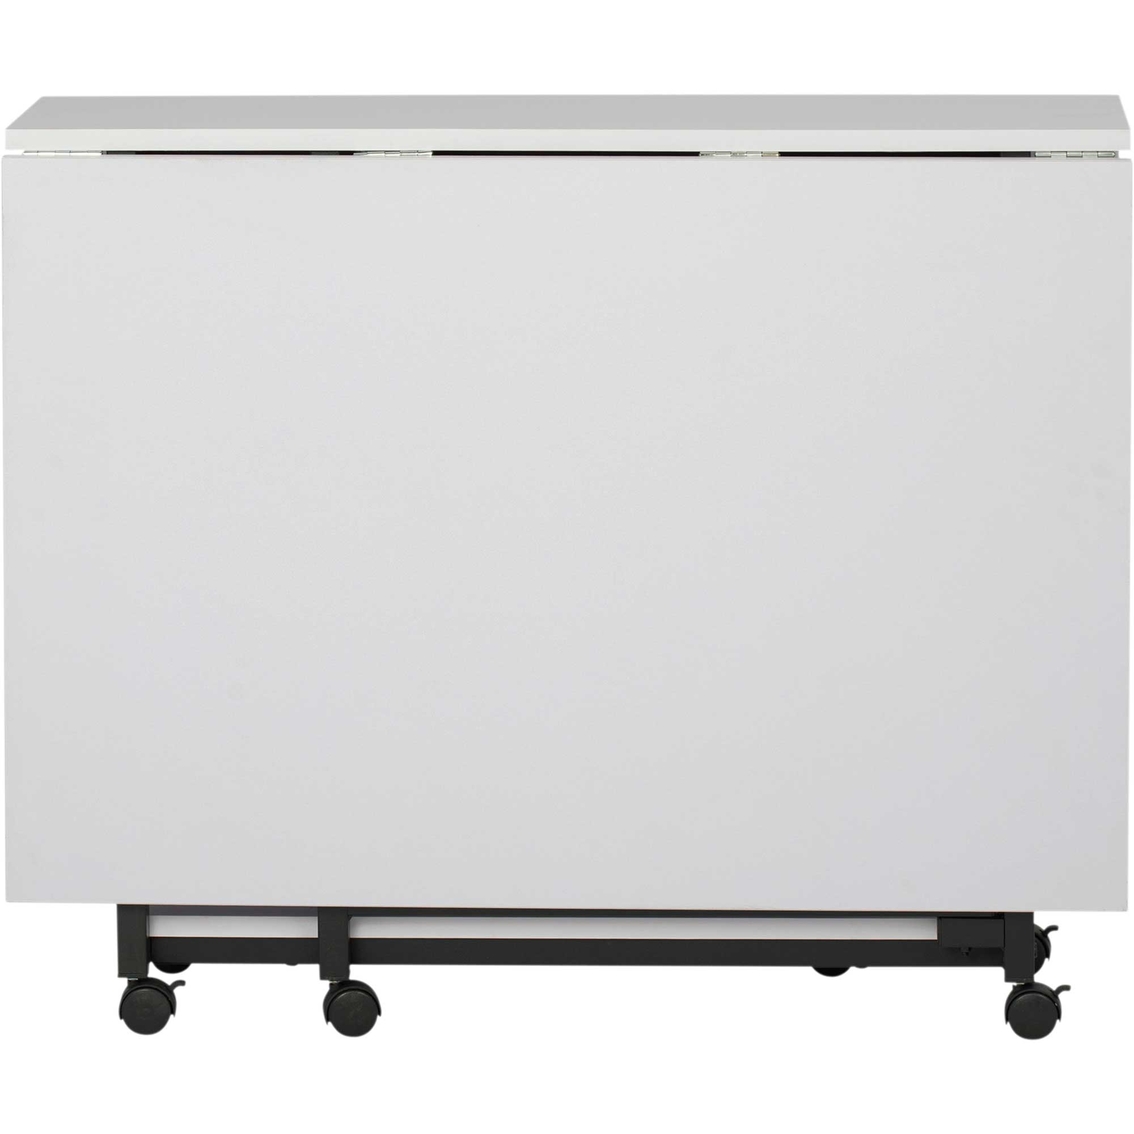 Studio Designs Home Mobile Fabric Cutting Table with Storage - Image 5 of 10